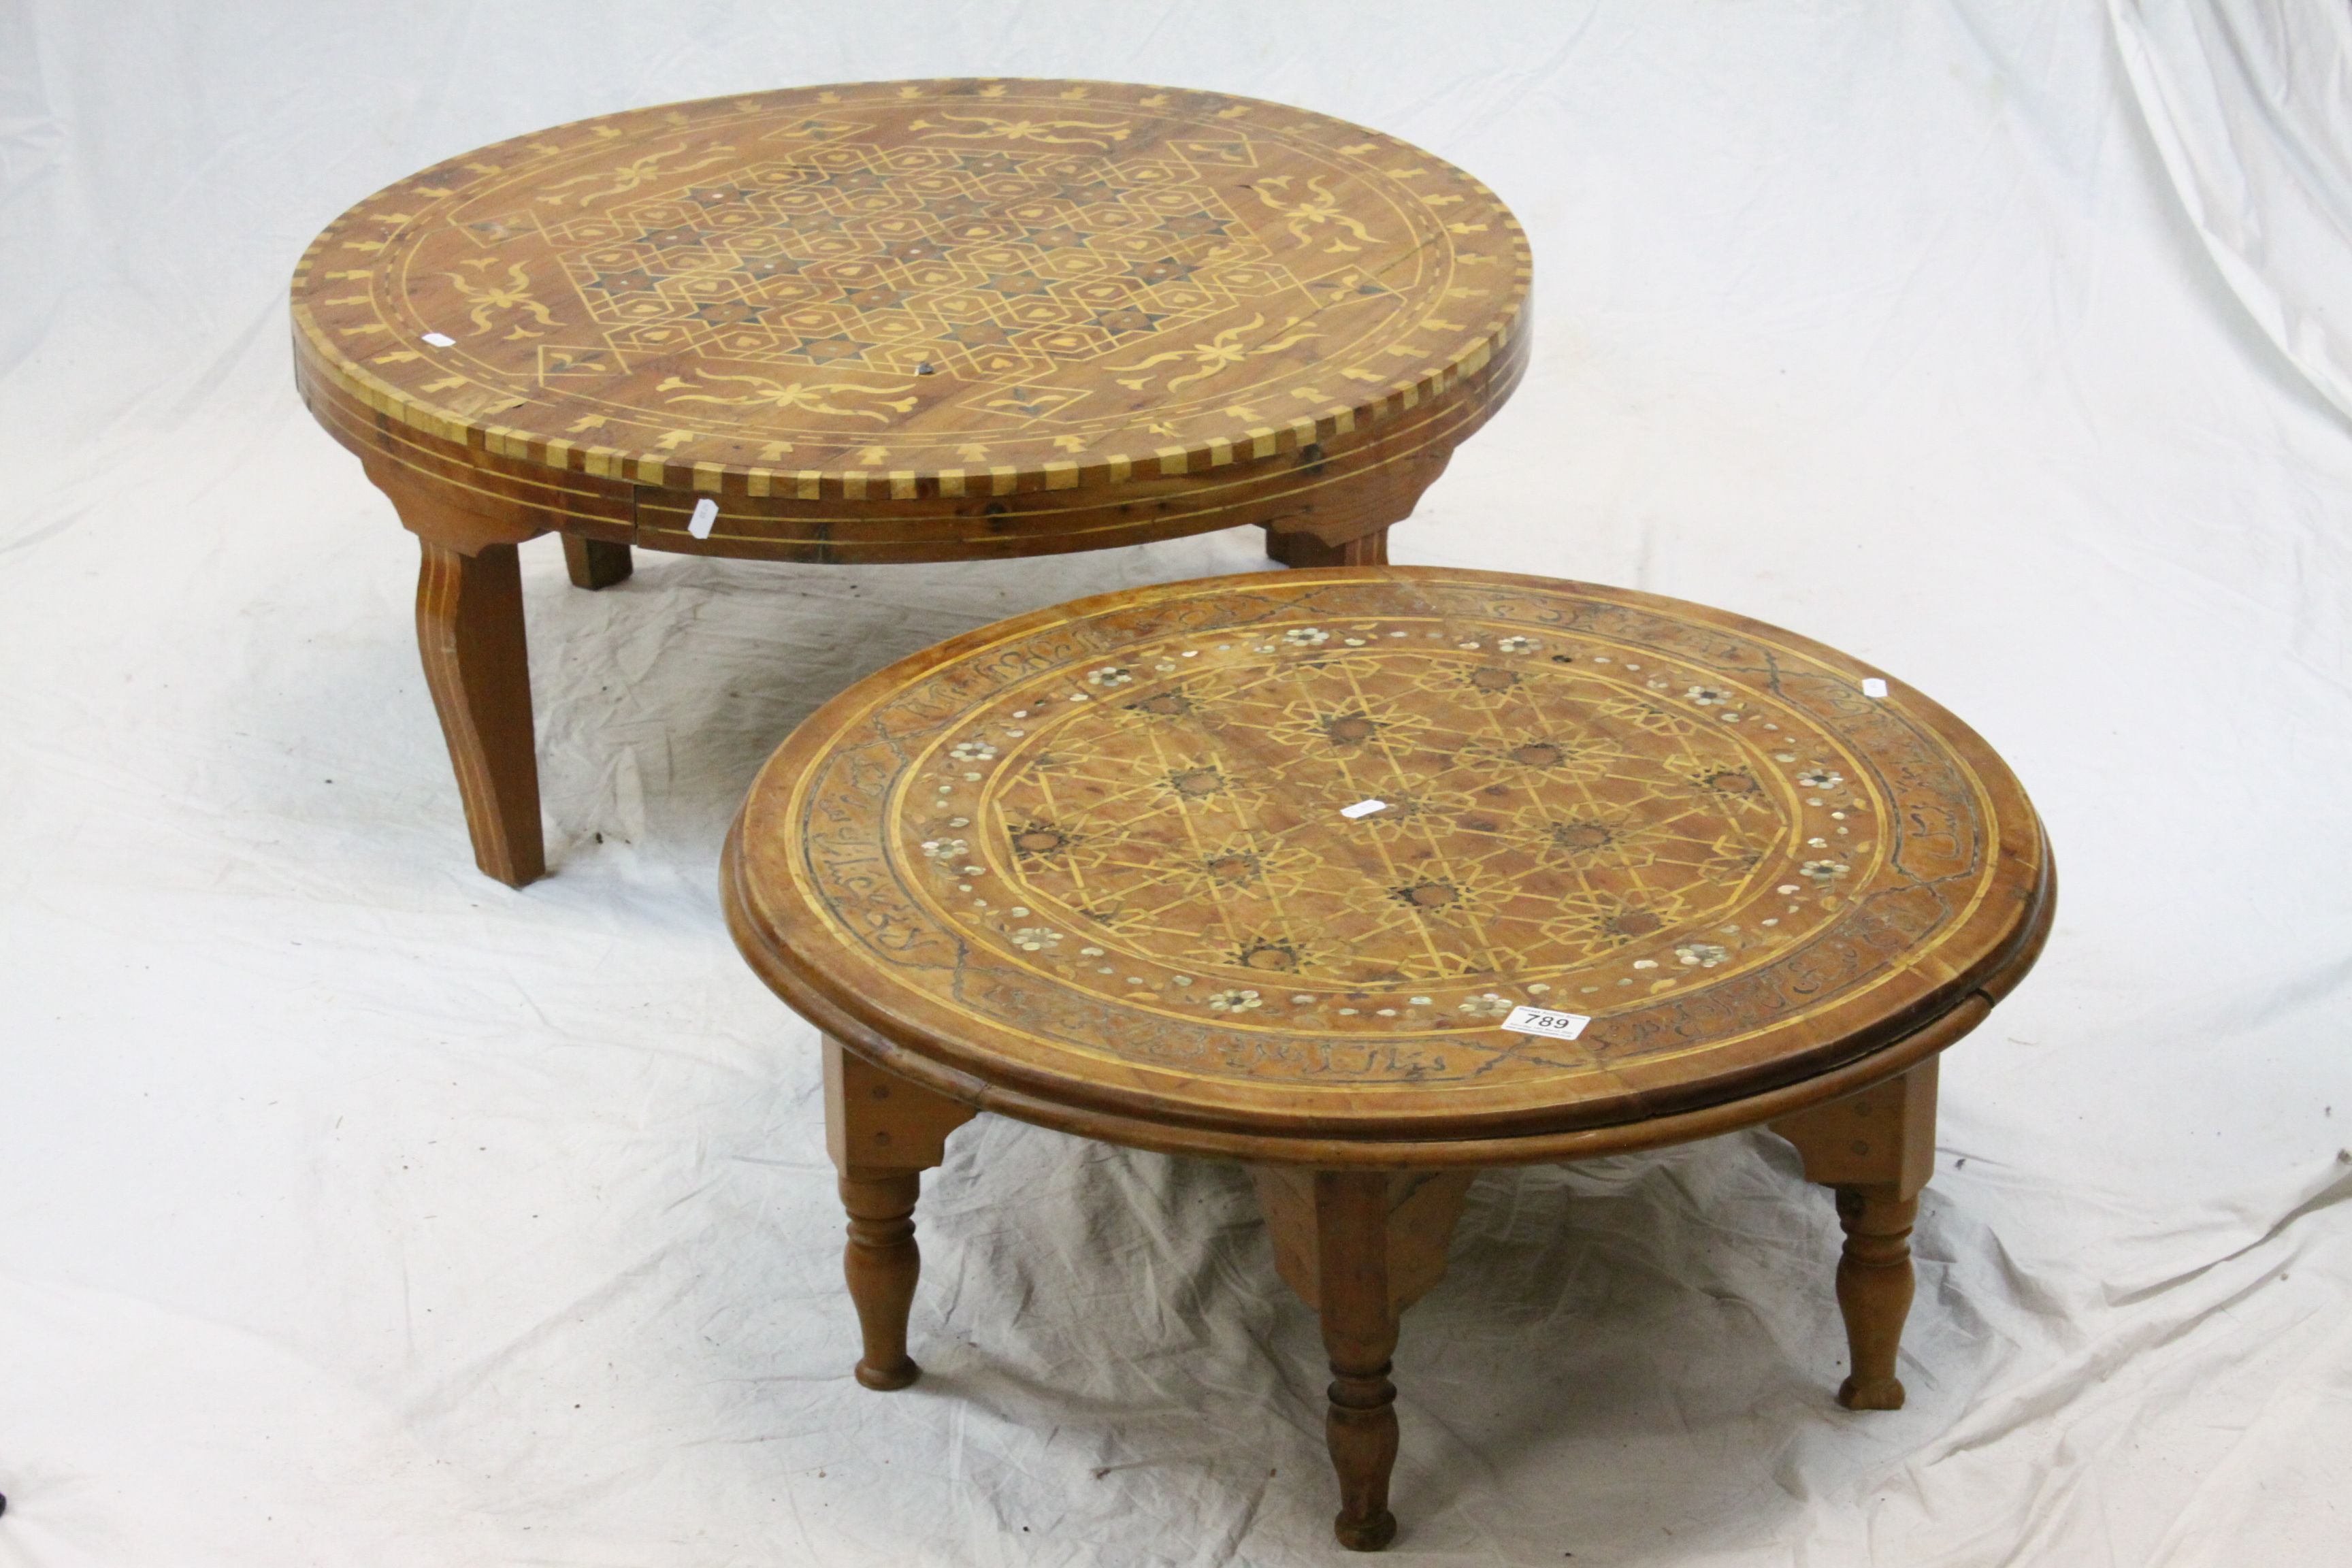 Two Middle Eastern Mother of Pearl Inlaid Circular Coffee Tables, 71cms diameter and 82cms diameter